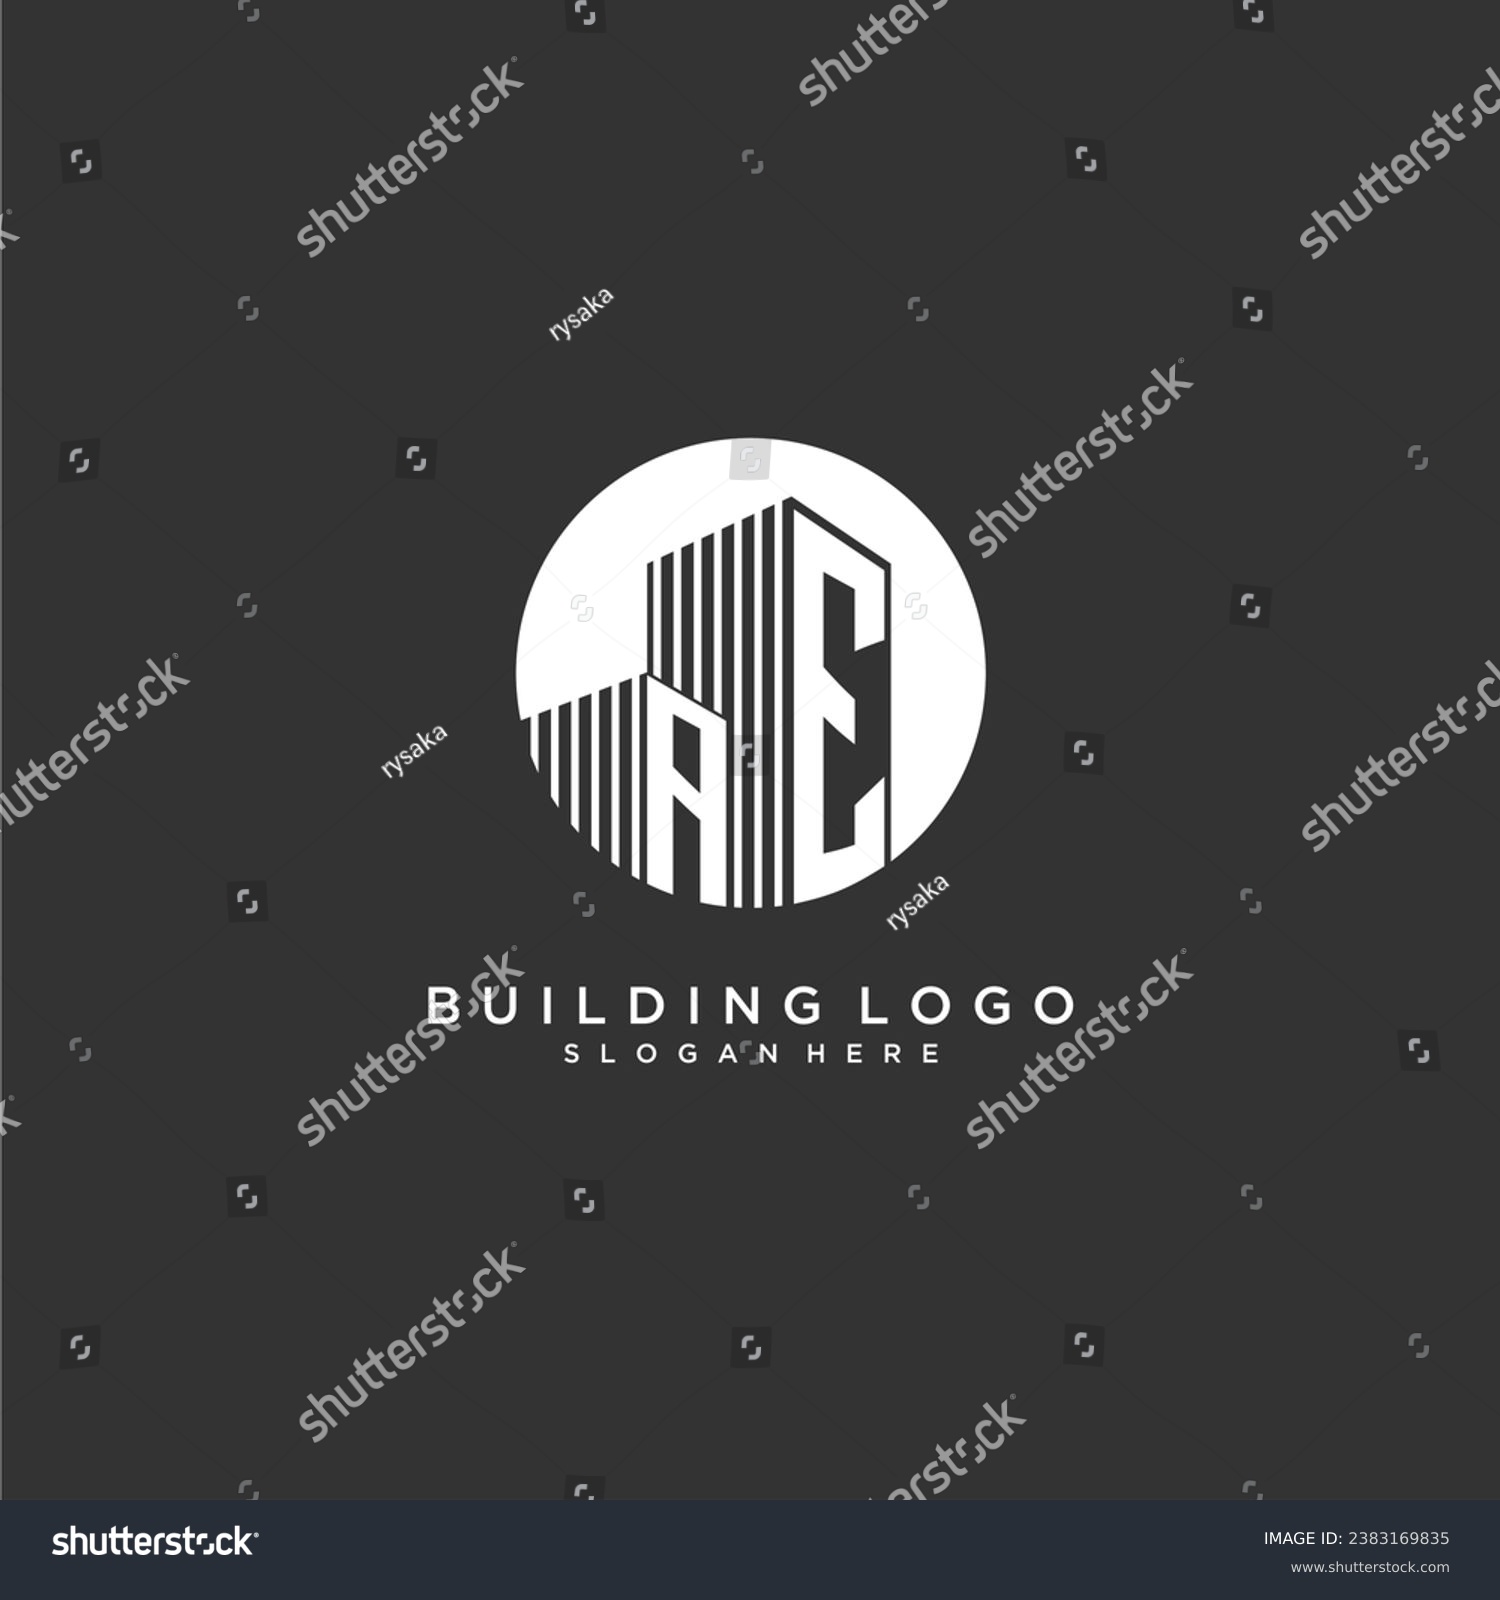 SVG of AE initial monogram building logo for real estate with creative circle style design svg